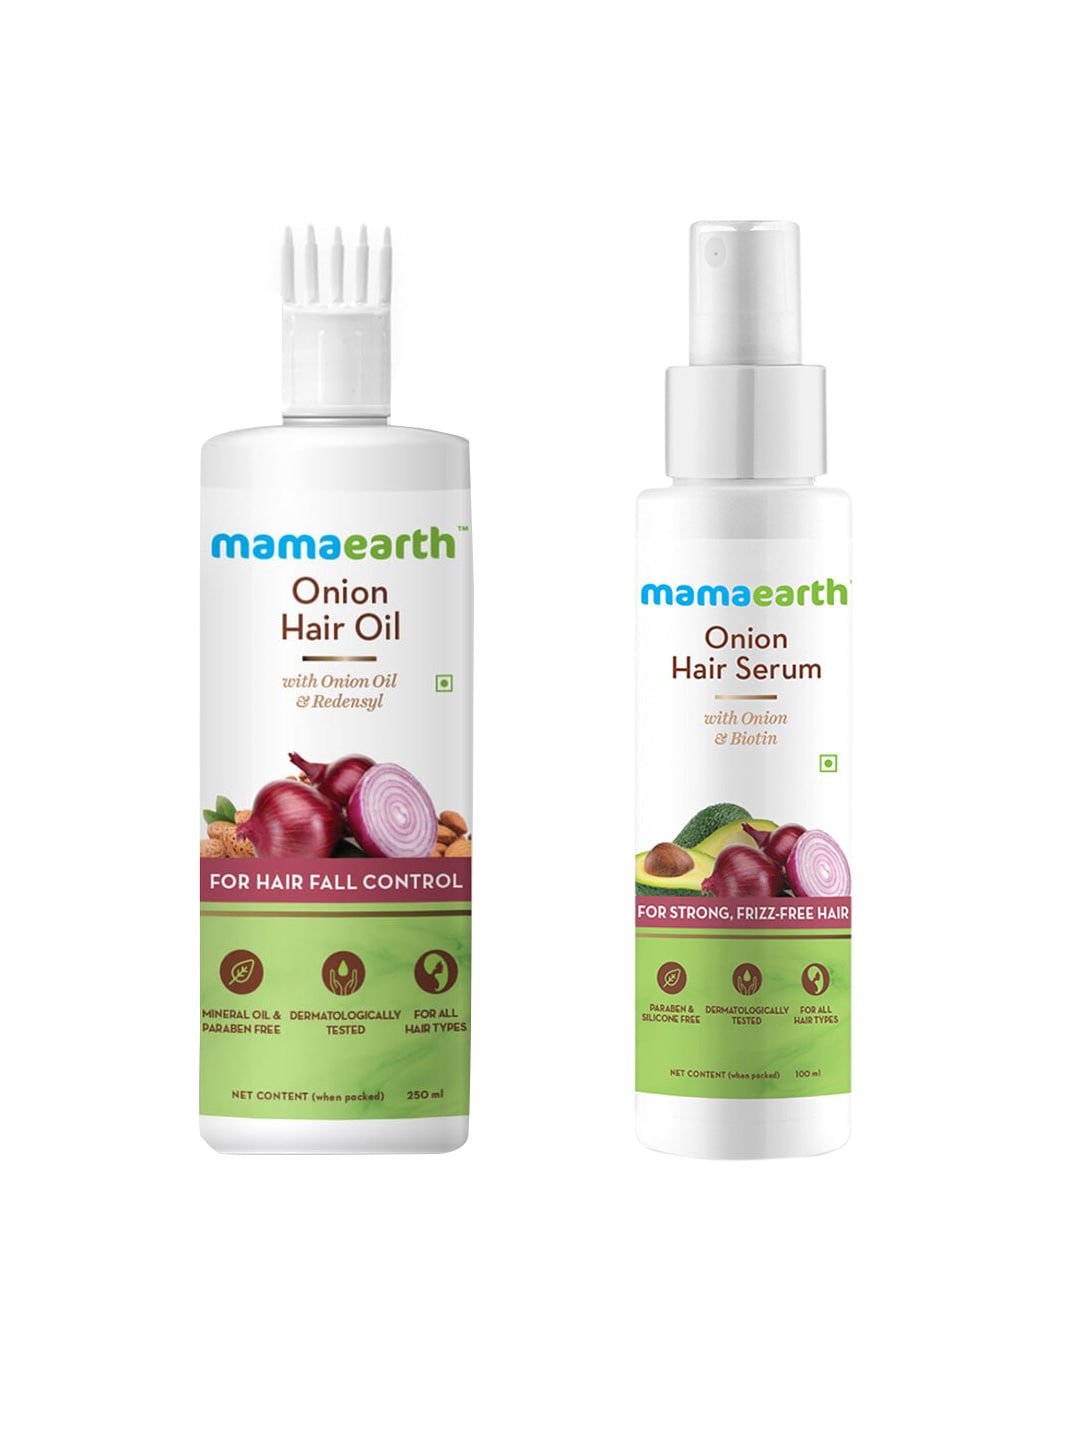 Mamaearth Unisex Set of Sustainable Onion Hair Oil & Hair Serum Price in  India, Full Specifications & Offers 